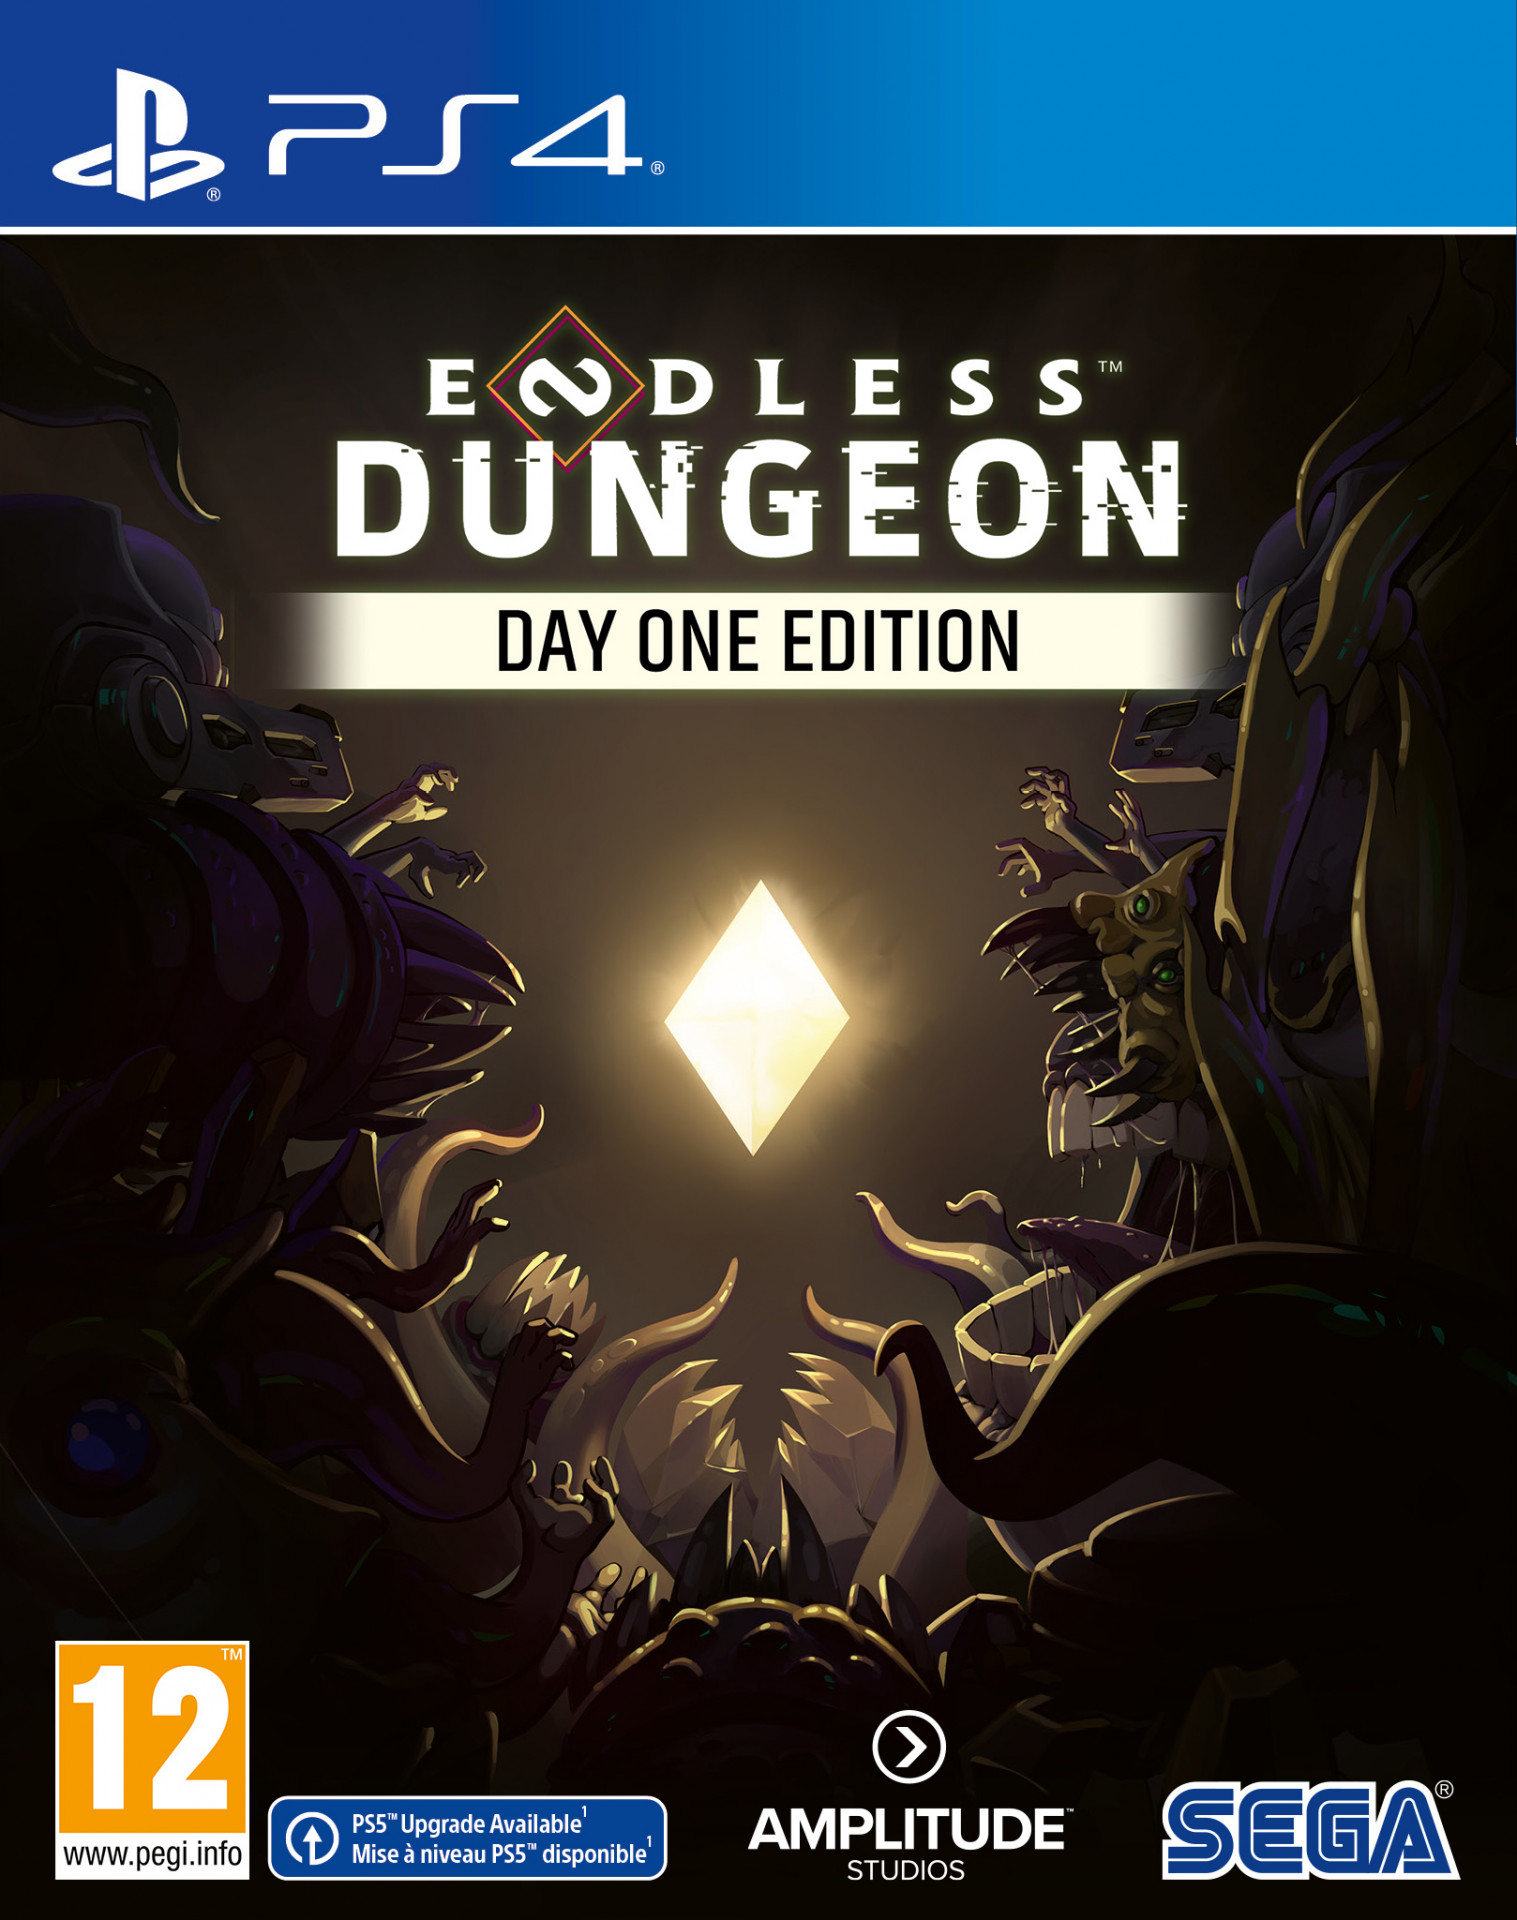 Endless Dungeon - Day One Edition (PS4), SEGA